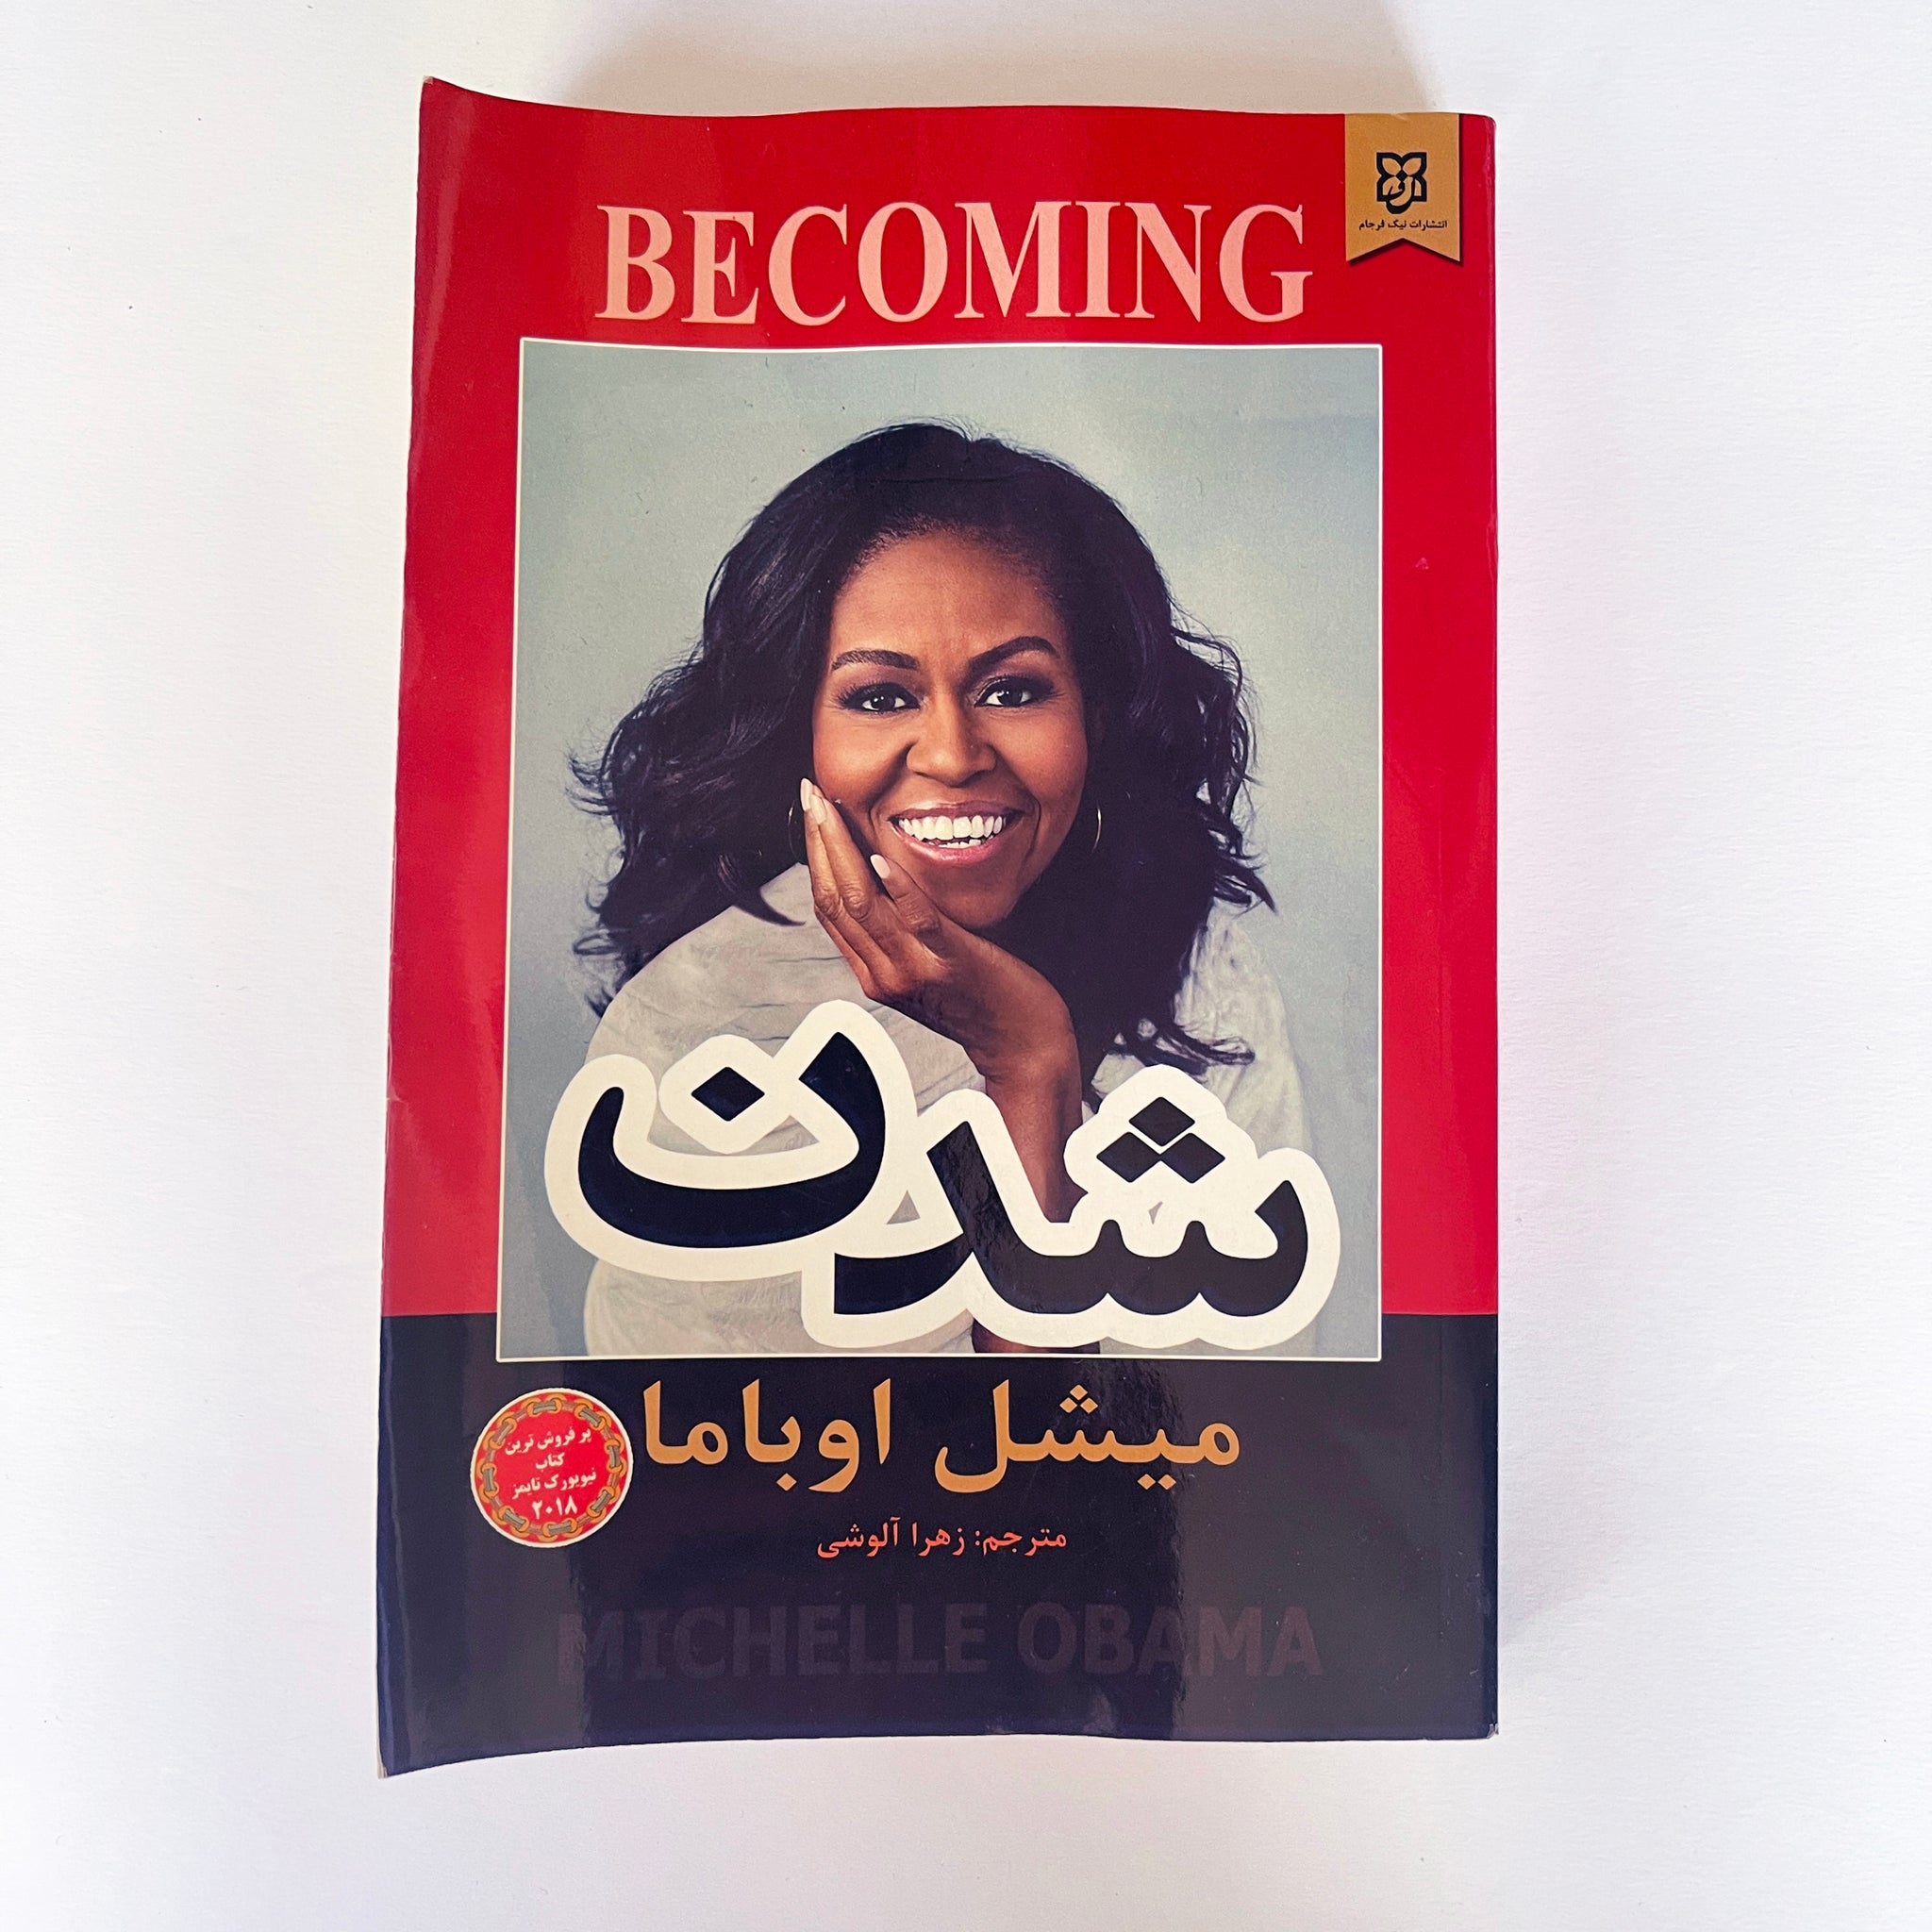 Becoming By Michelle Obama - Farsi Language